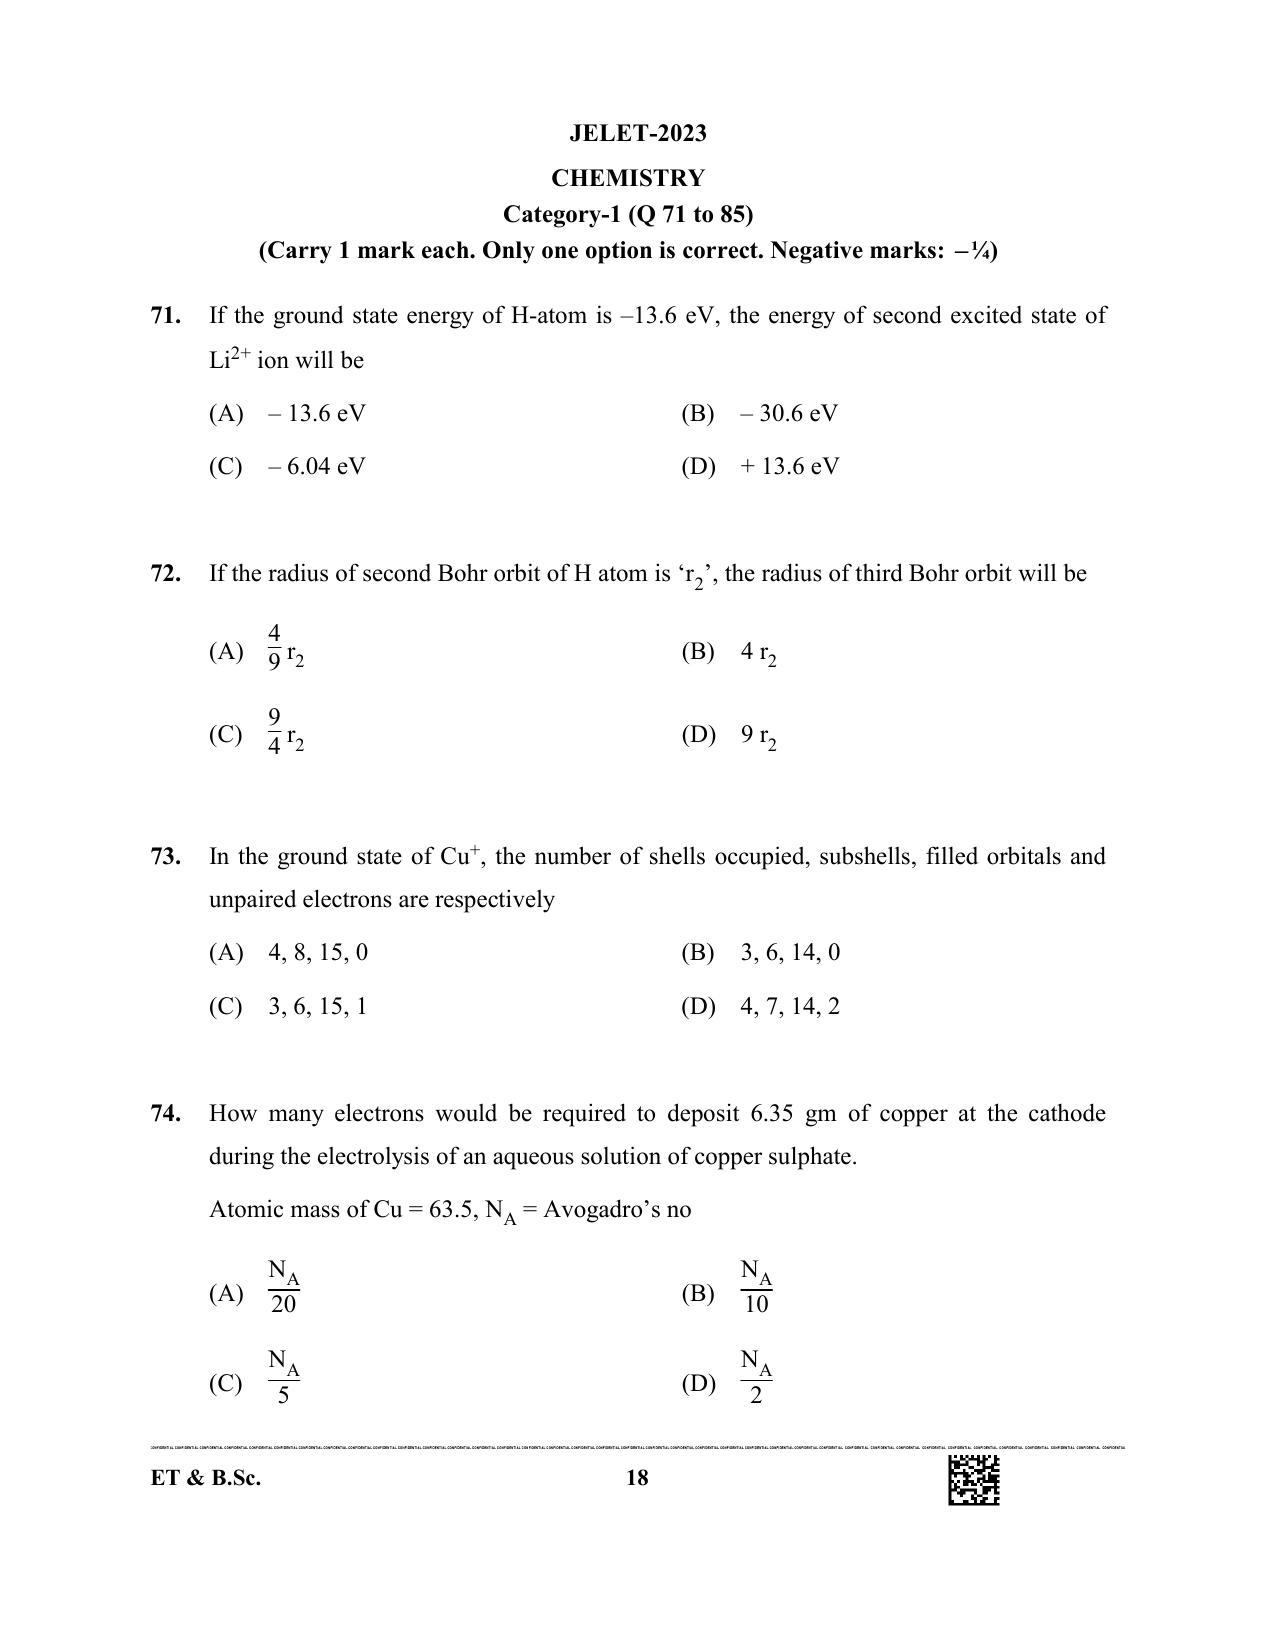 WBJEE JELET 2023 Paper I (ET & BSC) Question Papers - Page 18